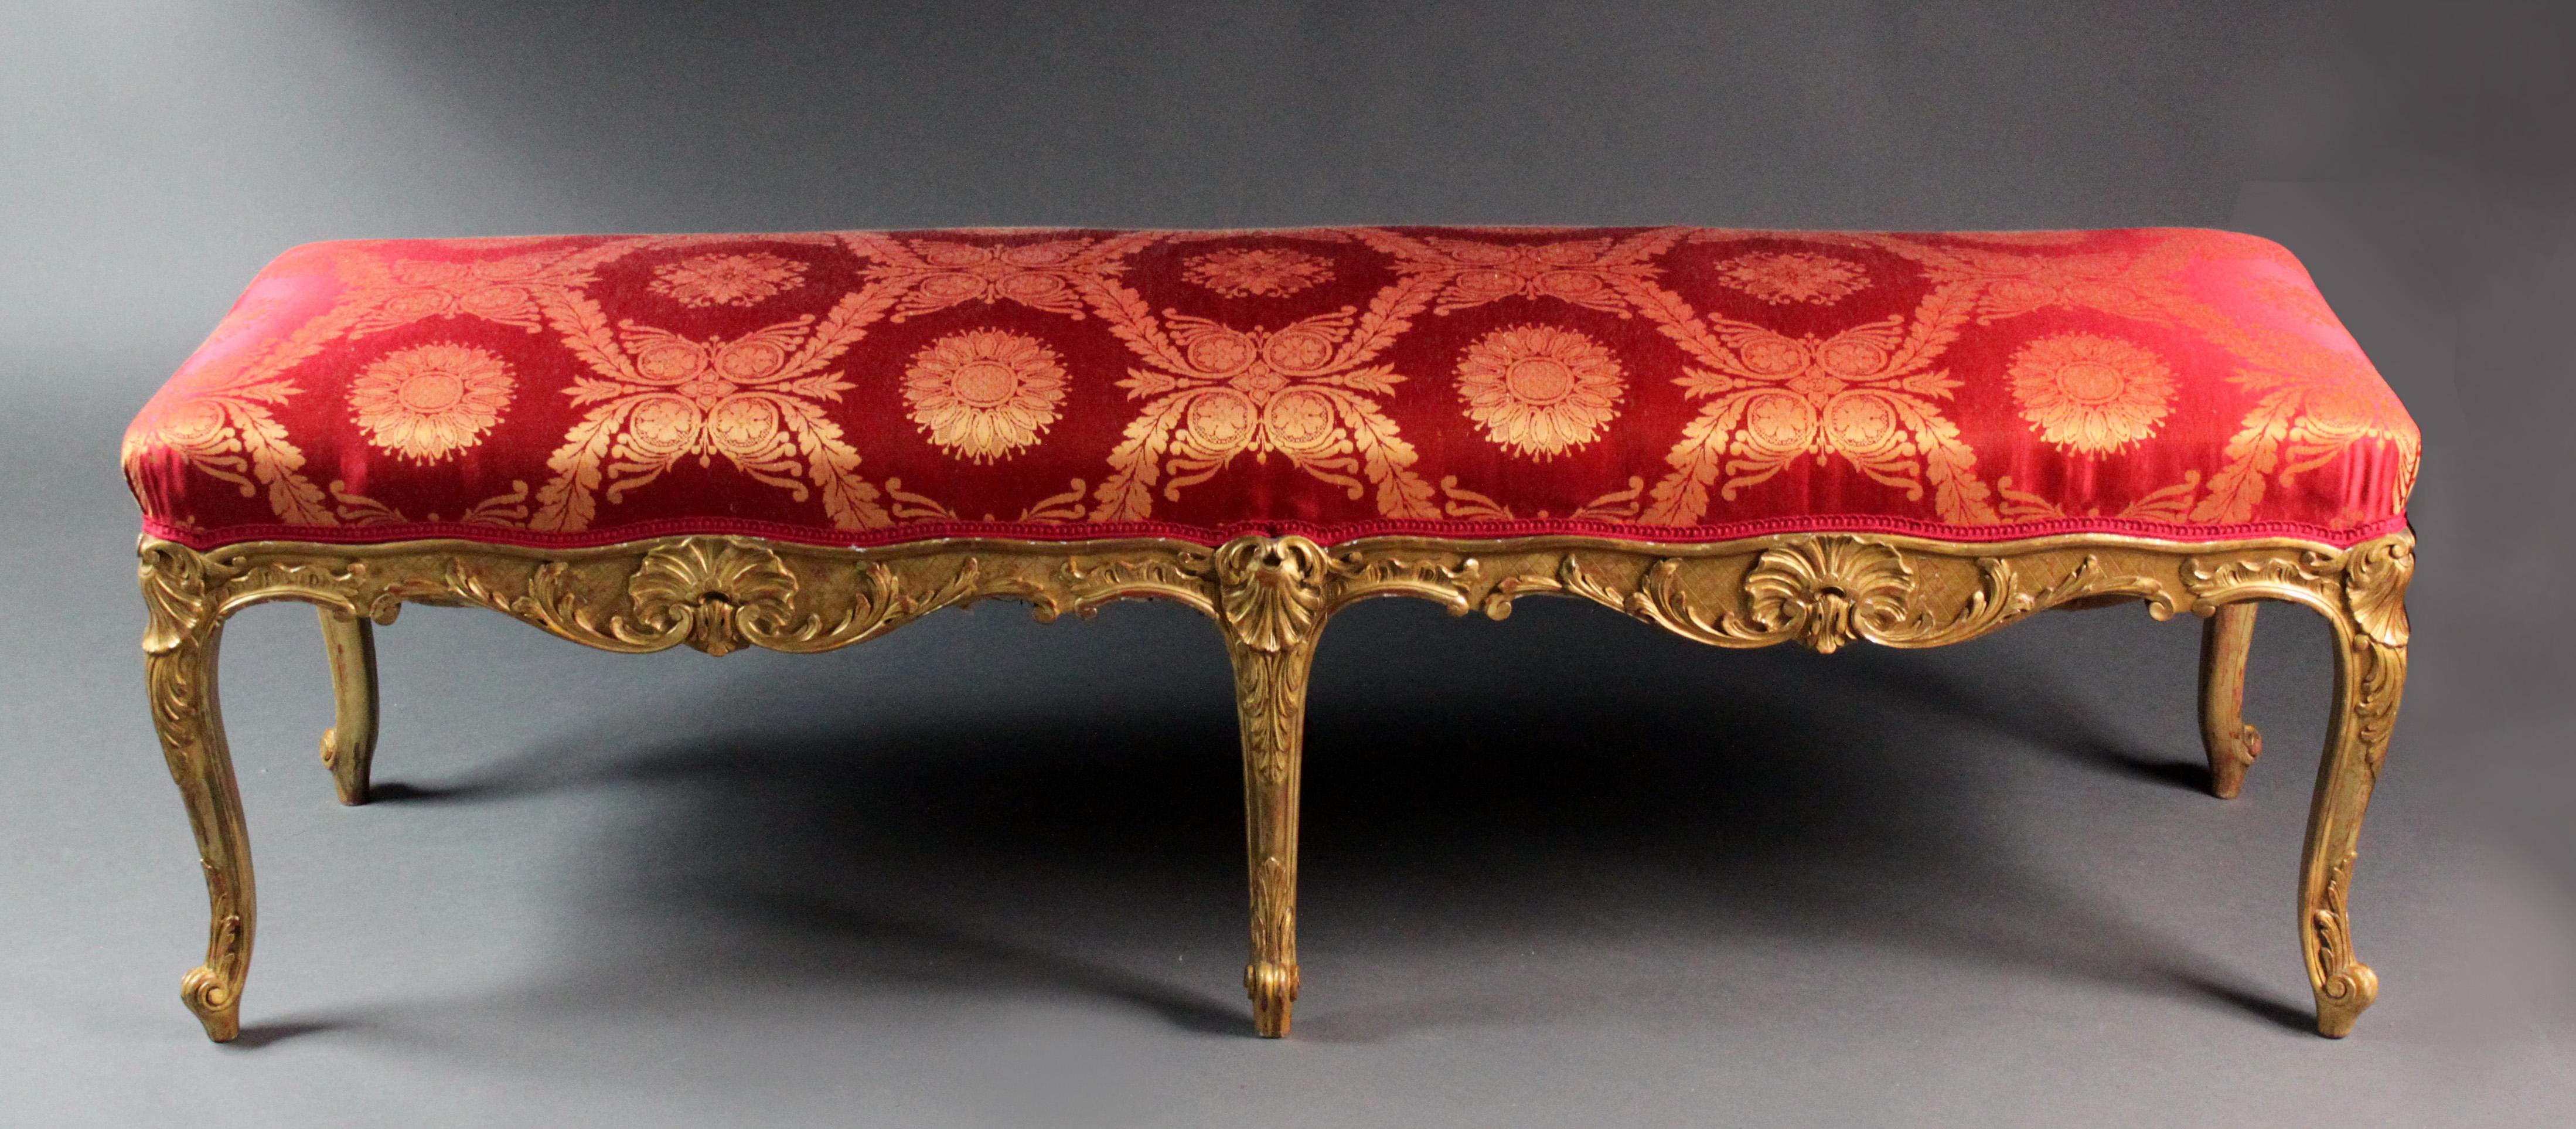 A fine Louis XVI style giltwood cabriole leg stool with carved detail: shells, acanthus leaves and foliage. Most of the original gilding intact with the attractive red bole showing through in places.
Recently re-covered in red and gilt silk.